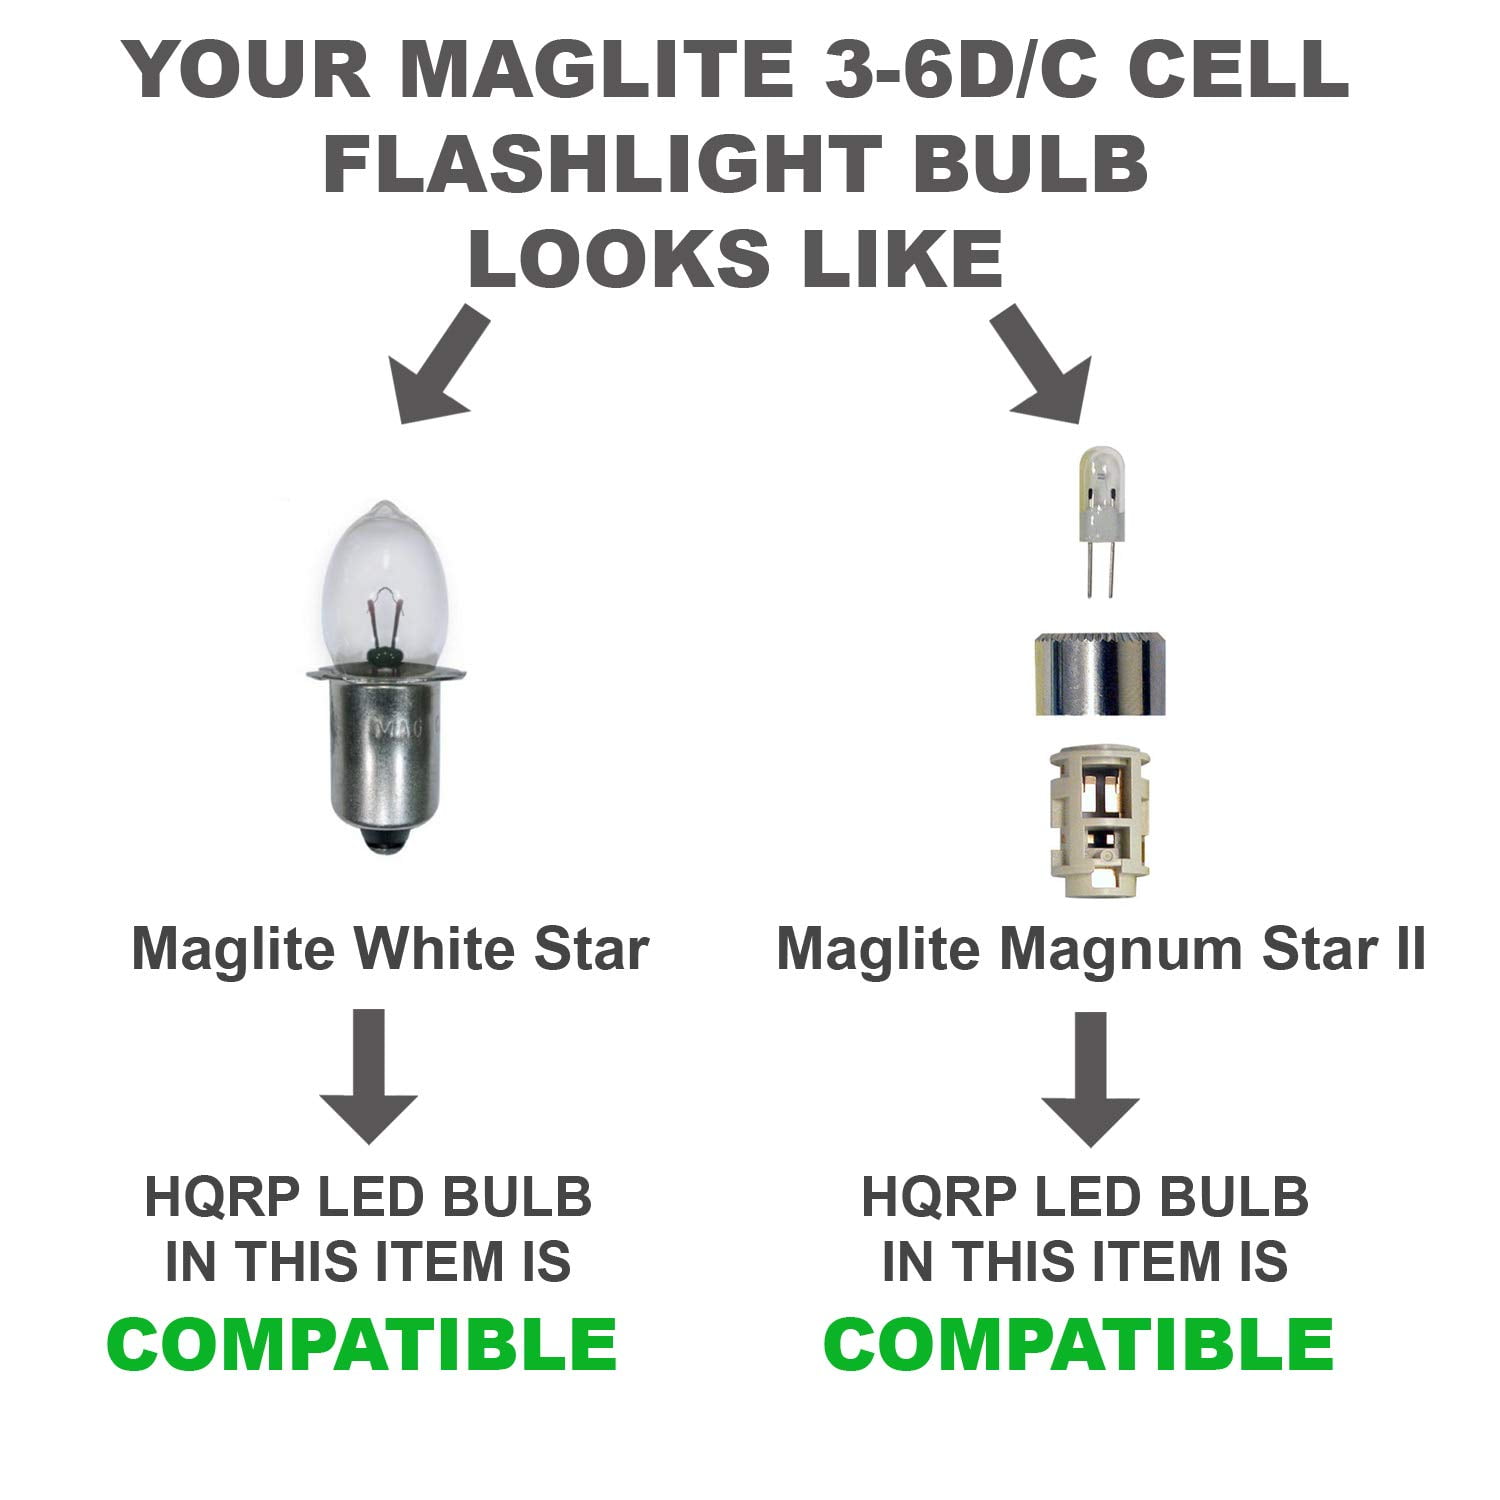 45 Lumens 0.5w LED Bulb for Mag-Lite Magnum Star White Star Lamp Replacement 